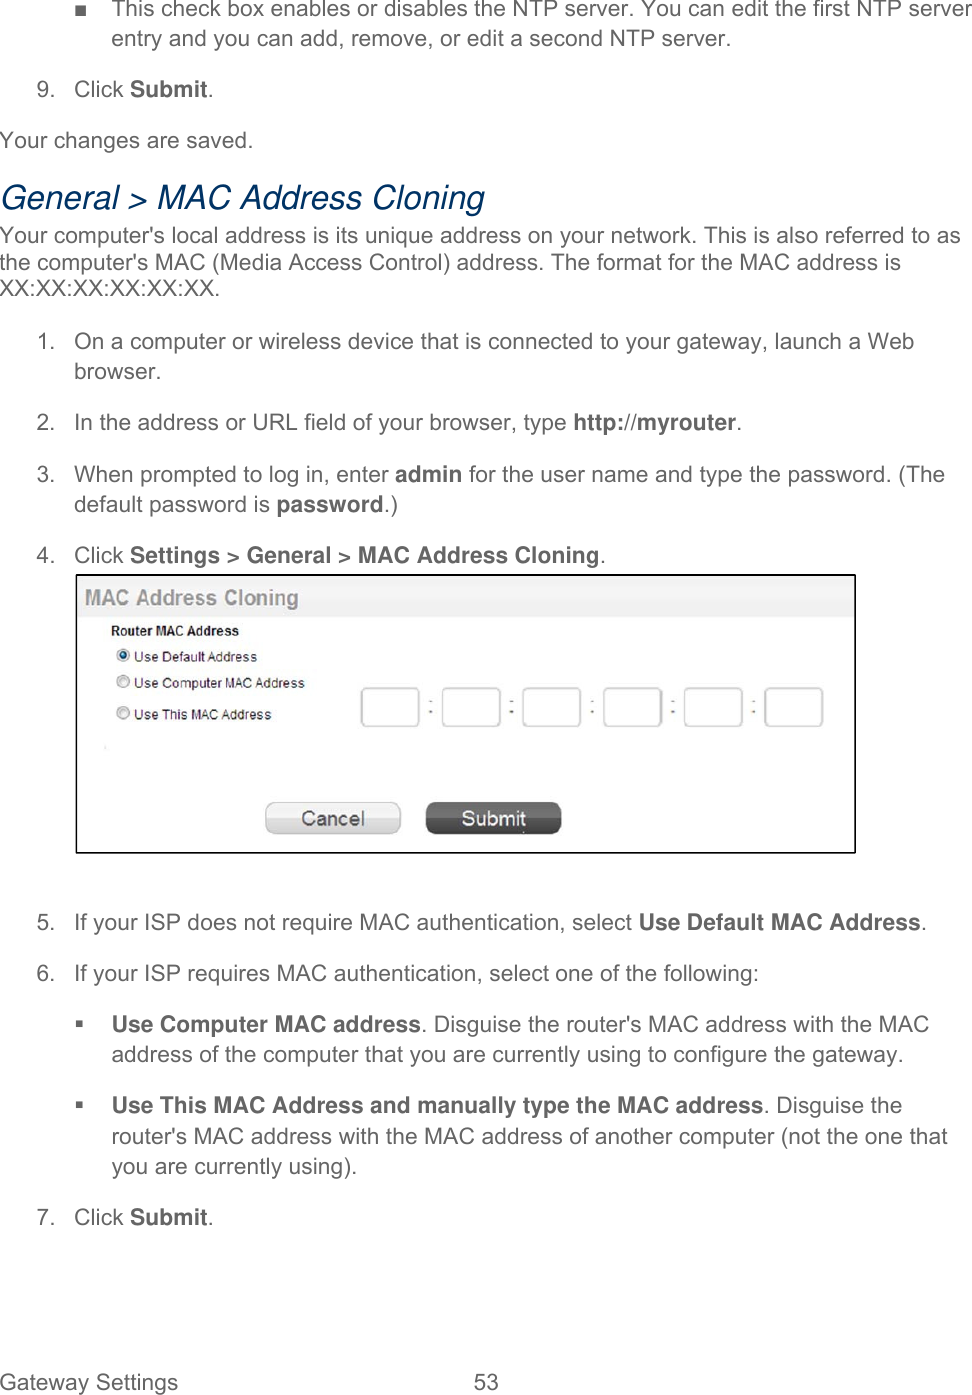 Gateway Settings  53   ■  This check box enables or disables the NTP server. You can edit the first NTP server entry and you can add, remove, or edit a second NTP server. 9. Click Submit. Your changes are saved. General &gt; MAC Address Cloning Your computer&apos;s local address is its unique address on your network. This is also referred to as the computer&apos;s MAC (Media Access Control) address. The format for the MAC address is XX:XX:XX:XX:XX:XX.  1.  On a computer or wireless device that is connected to your gateway, launch a Web browser. 2.  In the address or URL field of your browser, type http://myrouter.  3.  When prompted to log in, enter admin for the user name and type the password. (The default password is password.) 4. Click Settings &gt; General &gt; MAC Address Cloning.   5.  If your ISP does not require MAC authentication, select Use Default MAC Address. 6.  If your ISP requires MAC authentication, select one of the following:  Use Computer MAC address. Disguise the router&apos;s MAC address with the MAC address of the computer that you are currently using to configure the gateway.  Use This MAC Address and manually type the MAC address. Disguise the router&apos;s MAC address with the MAC address of another computer (not the one that you are currently using).  7. Click Submit. 